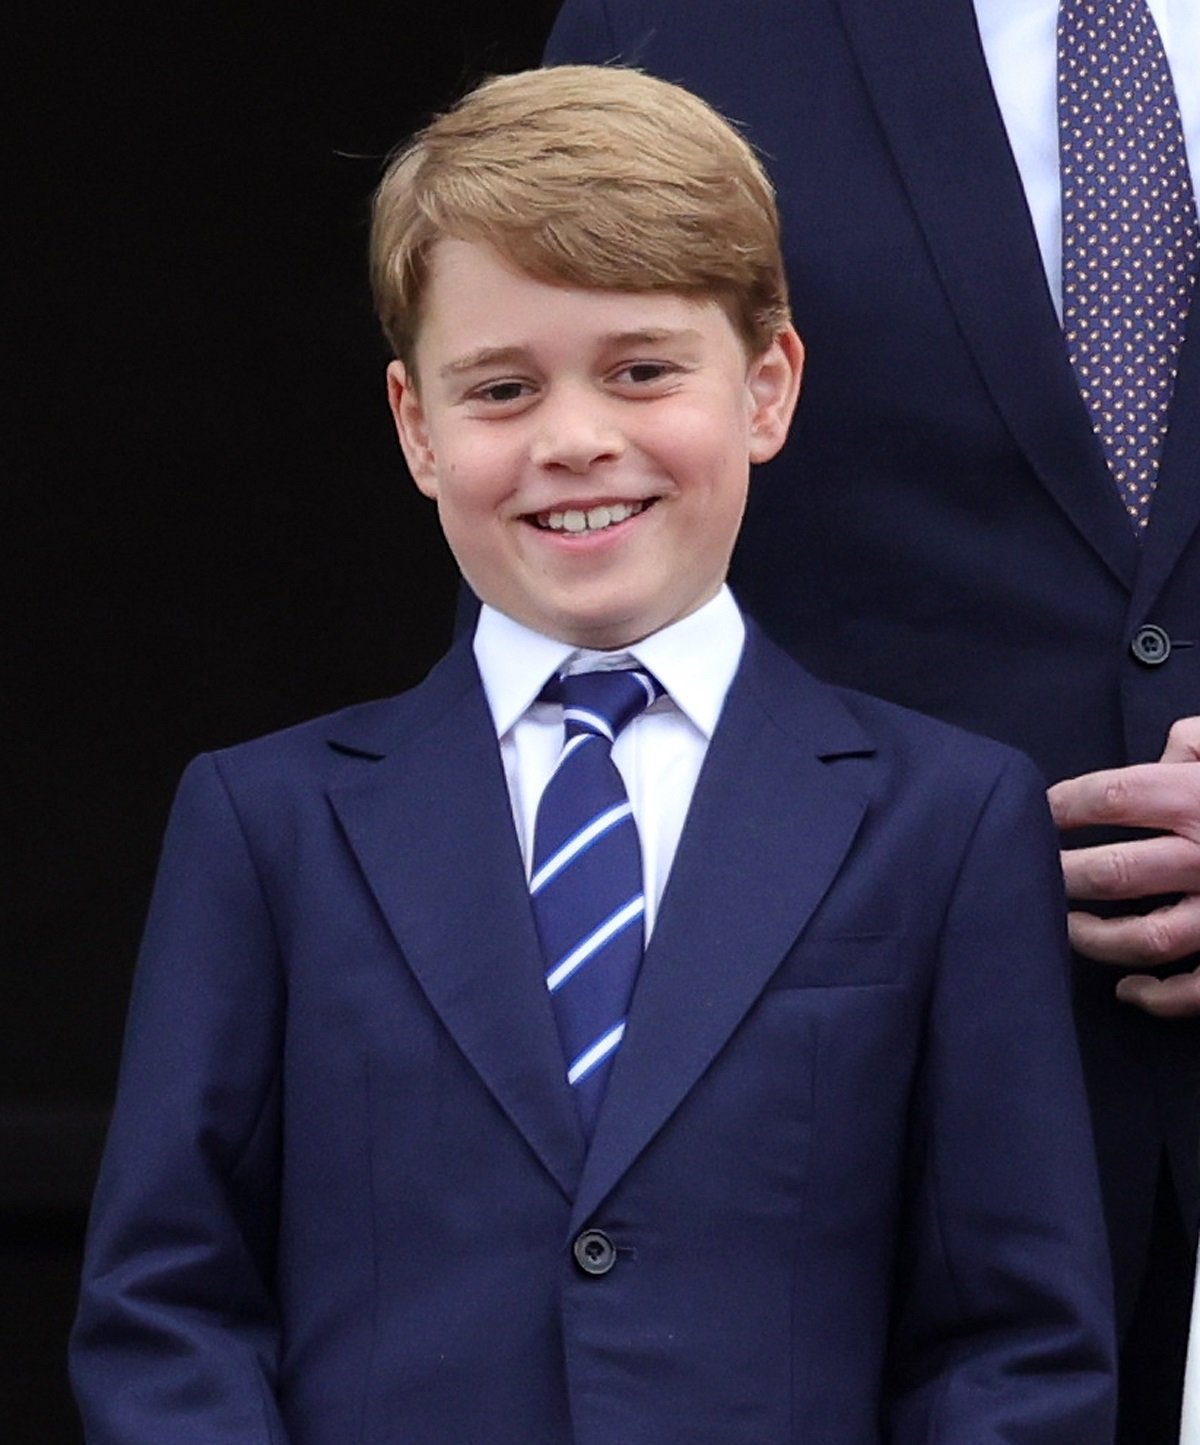 Prince George on the balcony of Buckingham Palace during the Platinum Jubilee Pageant